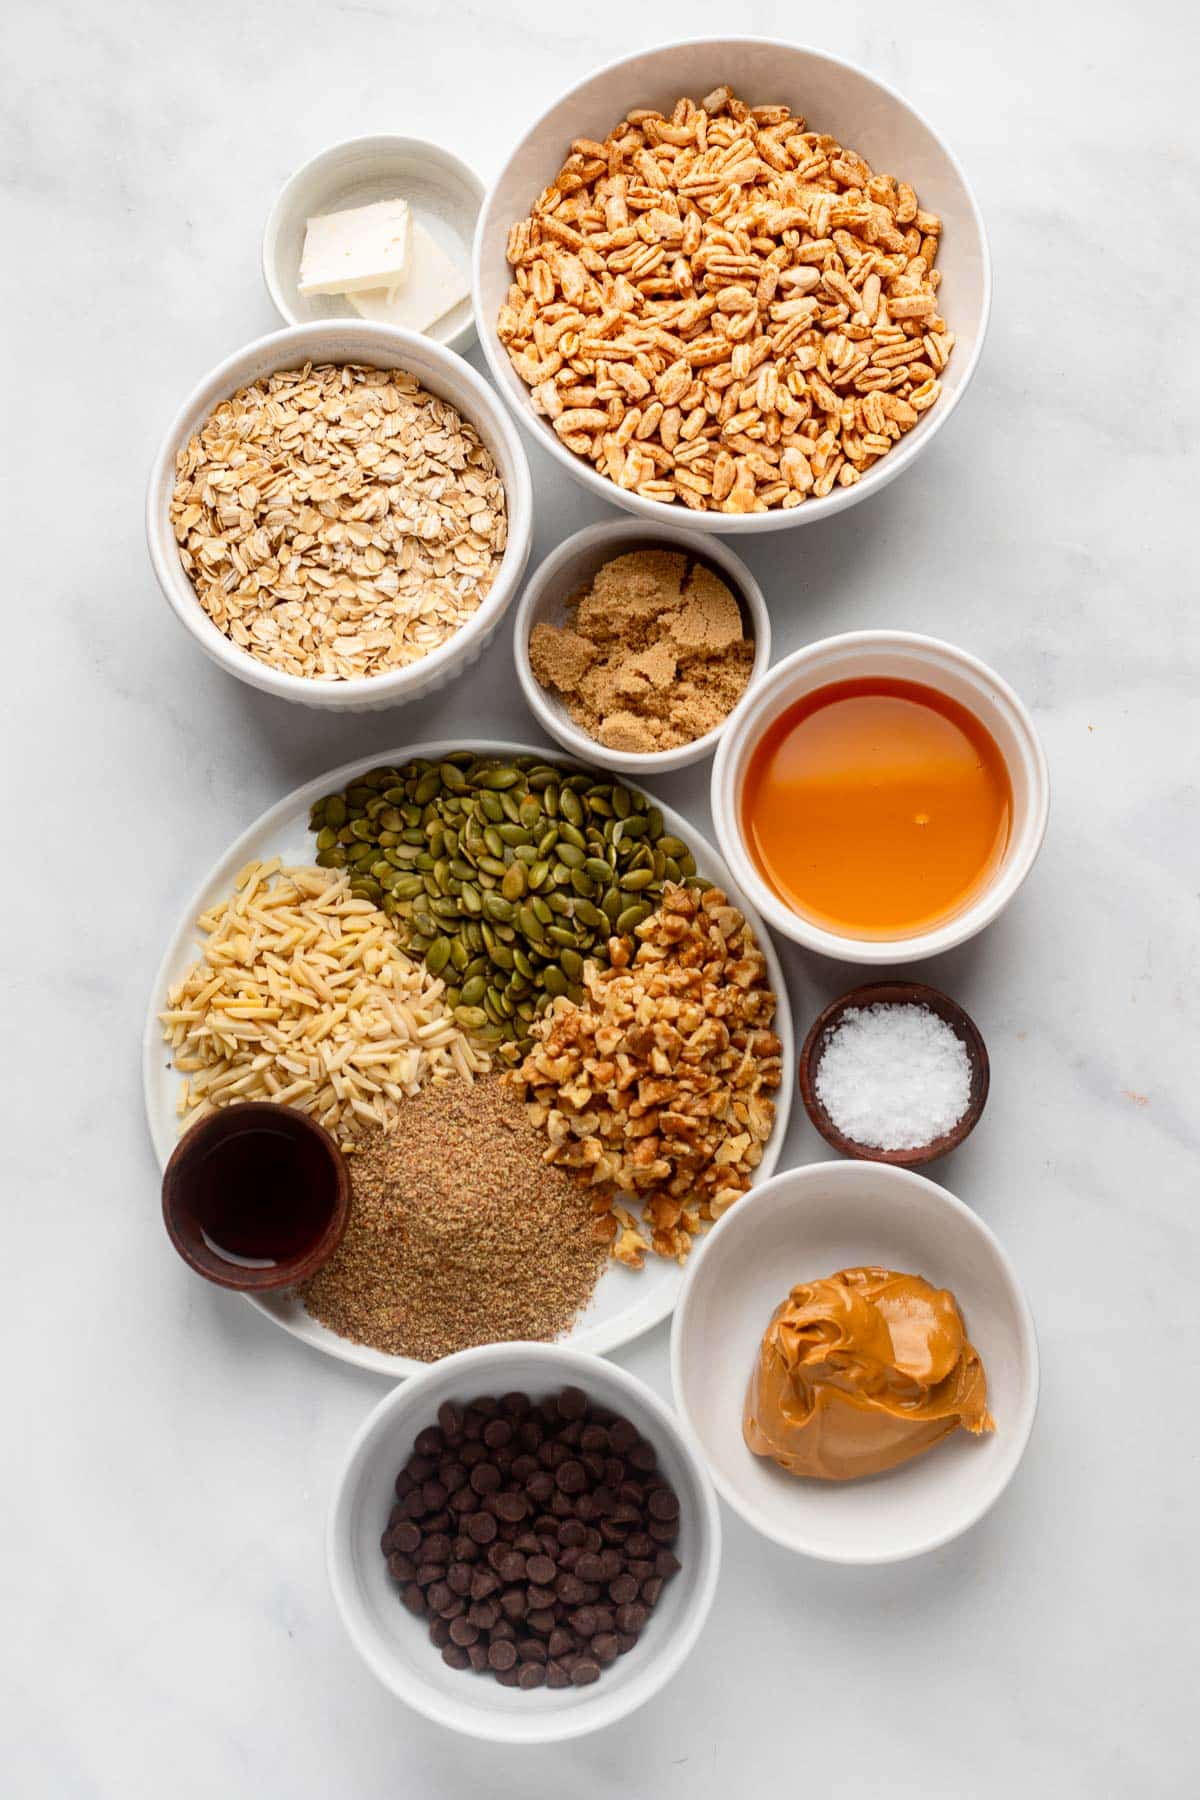 raw ingredients in bowls ready to make healthy protein bar recipe